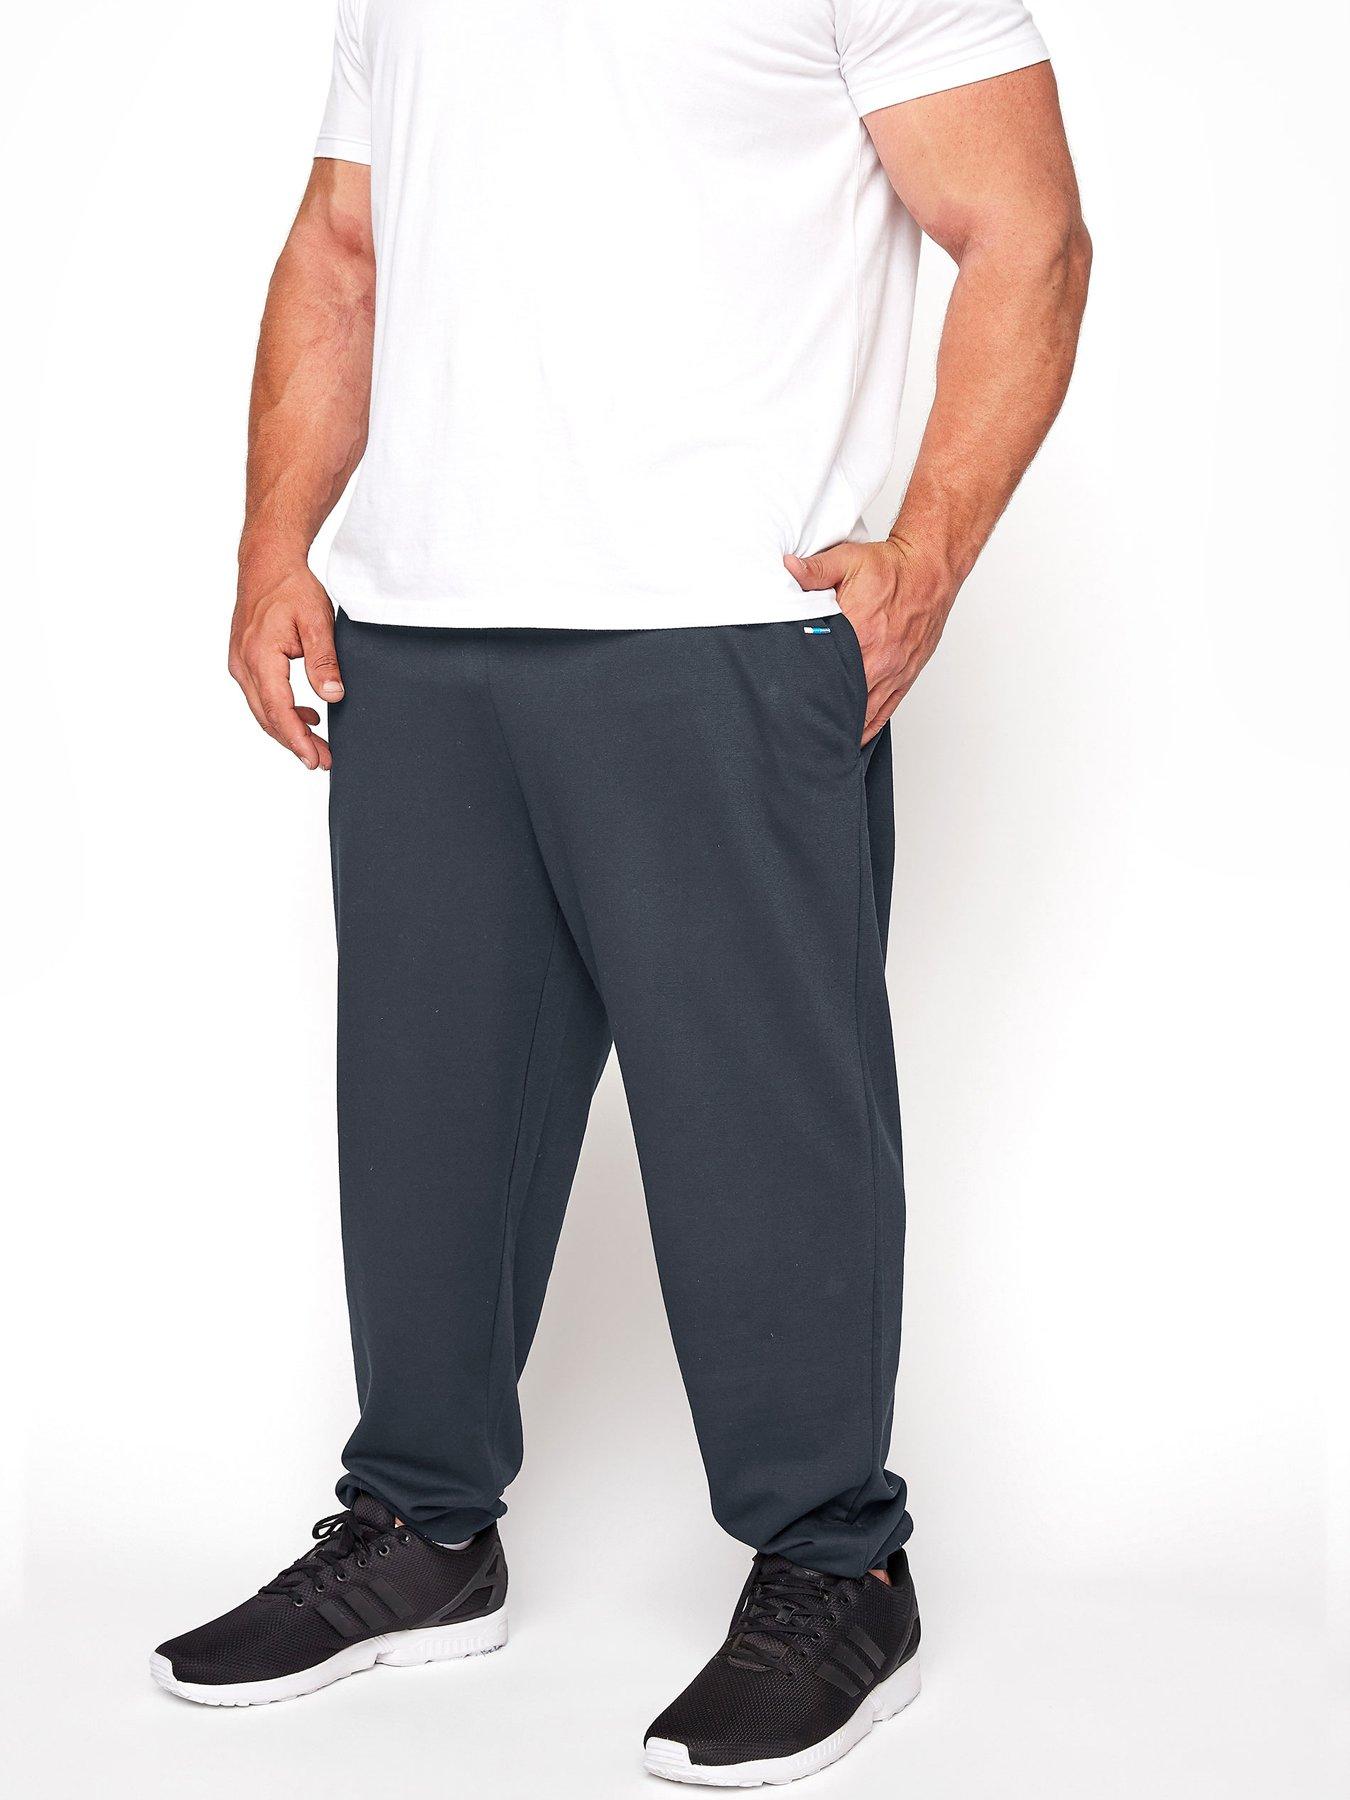 Joggers with Pockets – Bad Peach Fitness